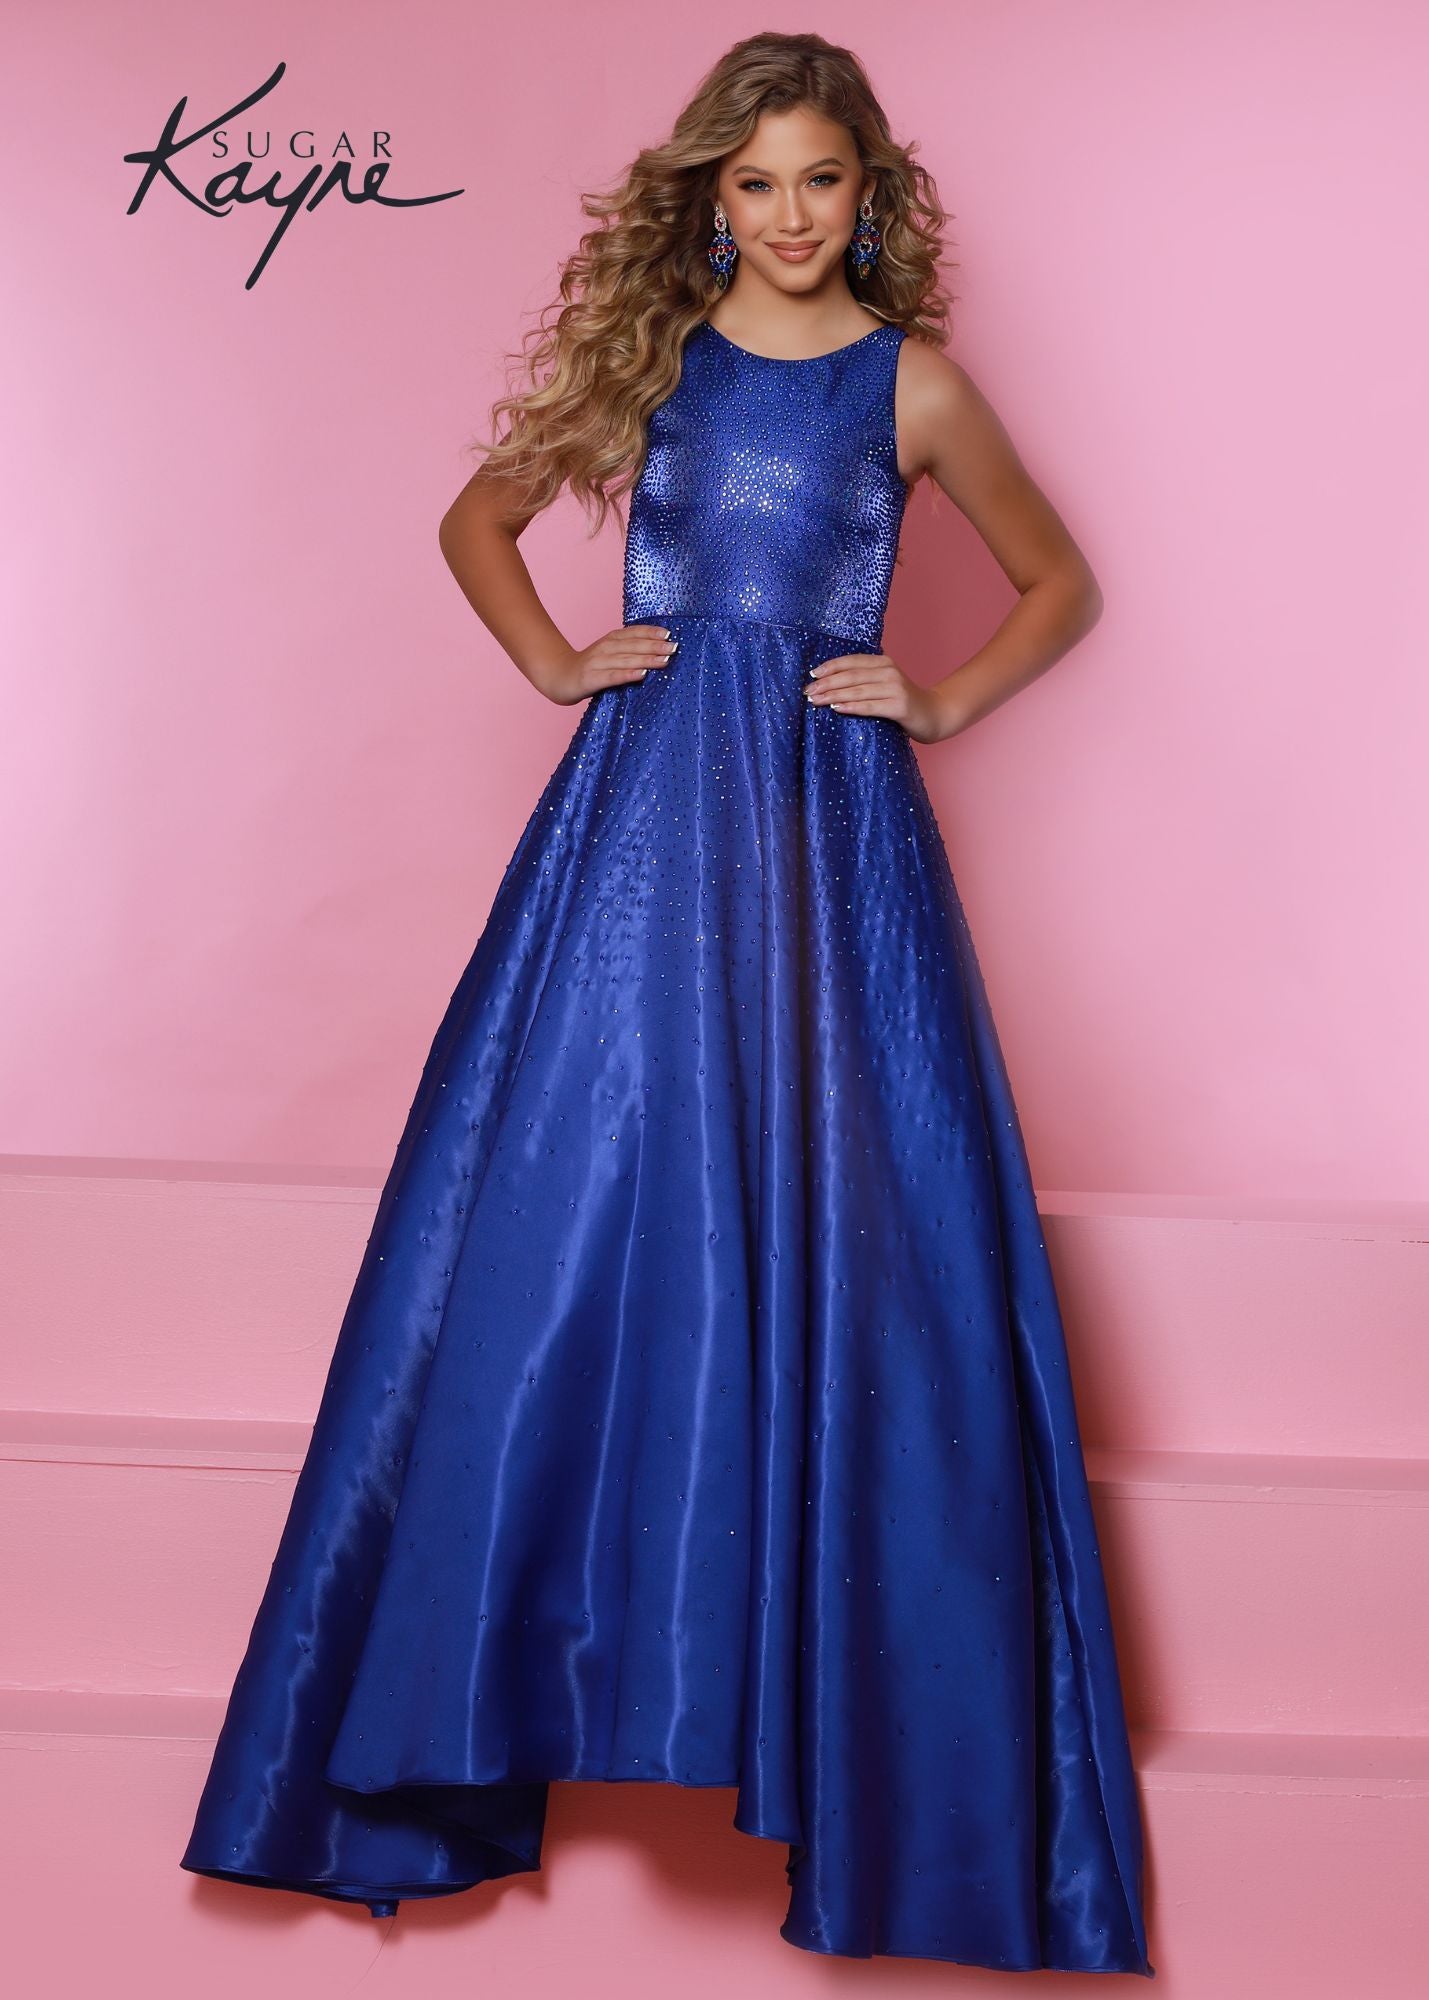 Sugar Kayne C322 Long Shimmer Satin A Line Girls Pageant Dress Embellished Gown Train Product Details Shine bright in this shimmer satin A-line gown! The bodice is fully beaded with hot-fix and gradually fades out throughout the skirt. The long train will glide beautifully across the stage.  Colors: Aqua, Royal, Red, White  Sizes: 2, 4, 6, 8, 10, 12, 14, 16  Fabric Shimmer Satin, Satin Lining